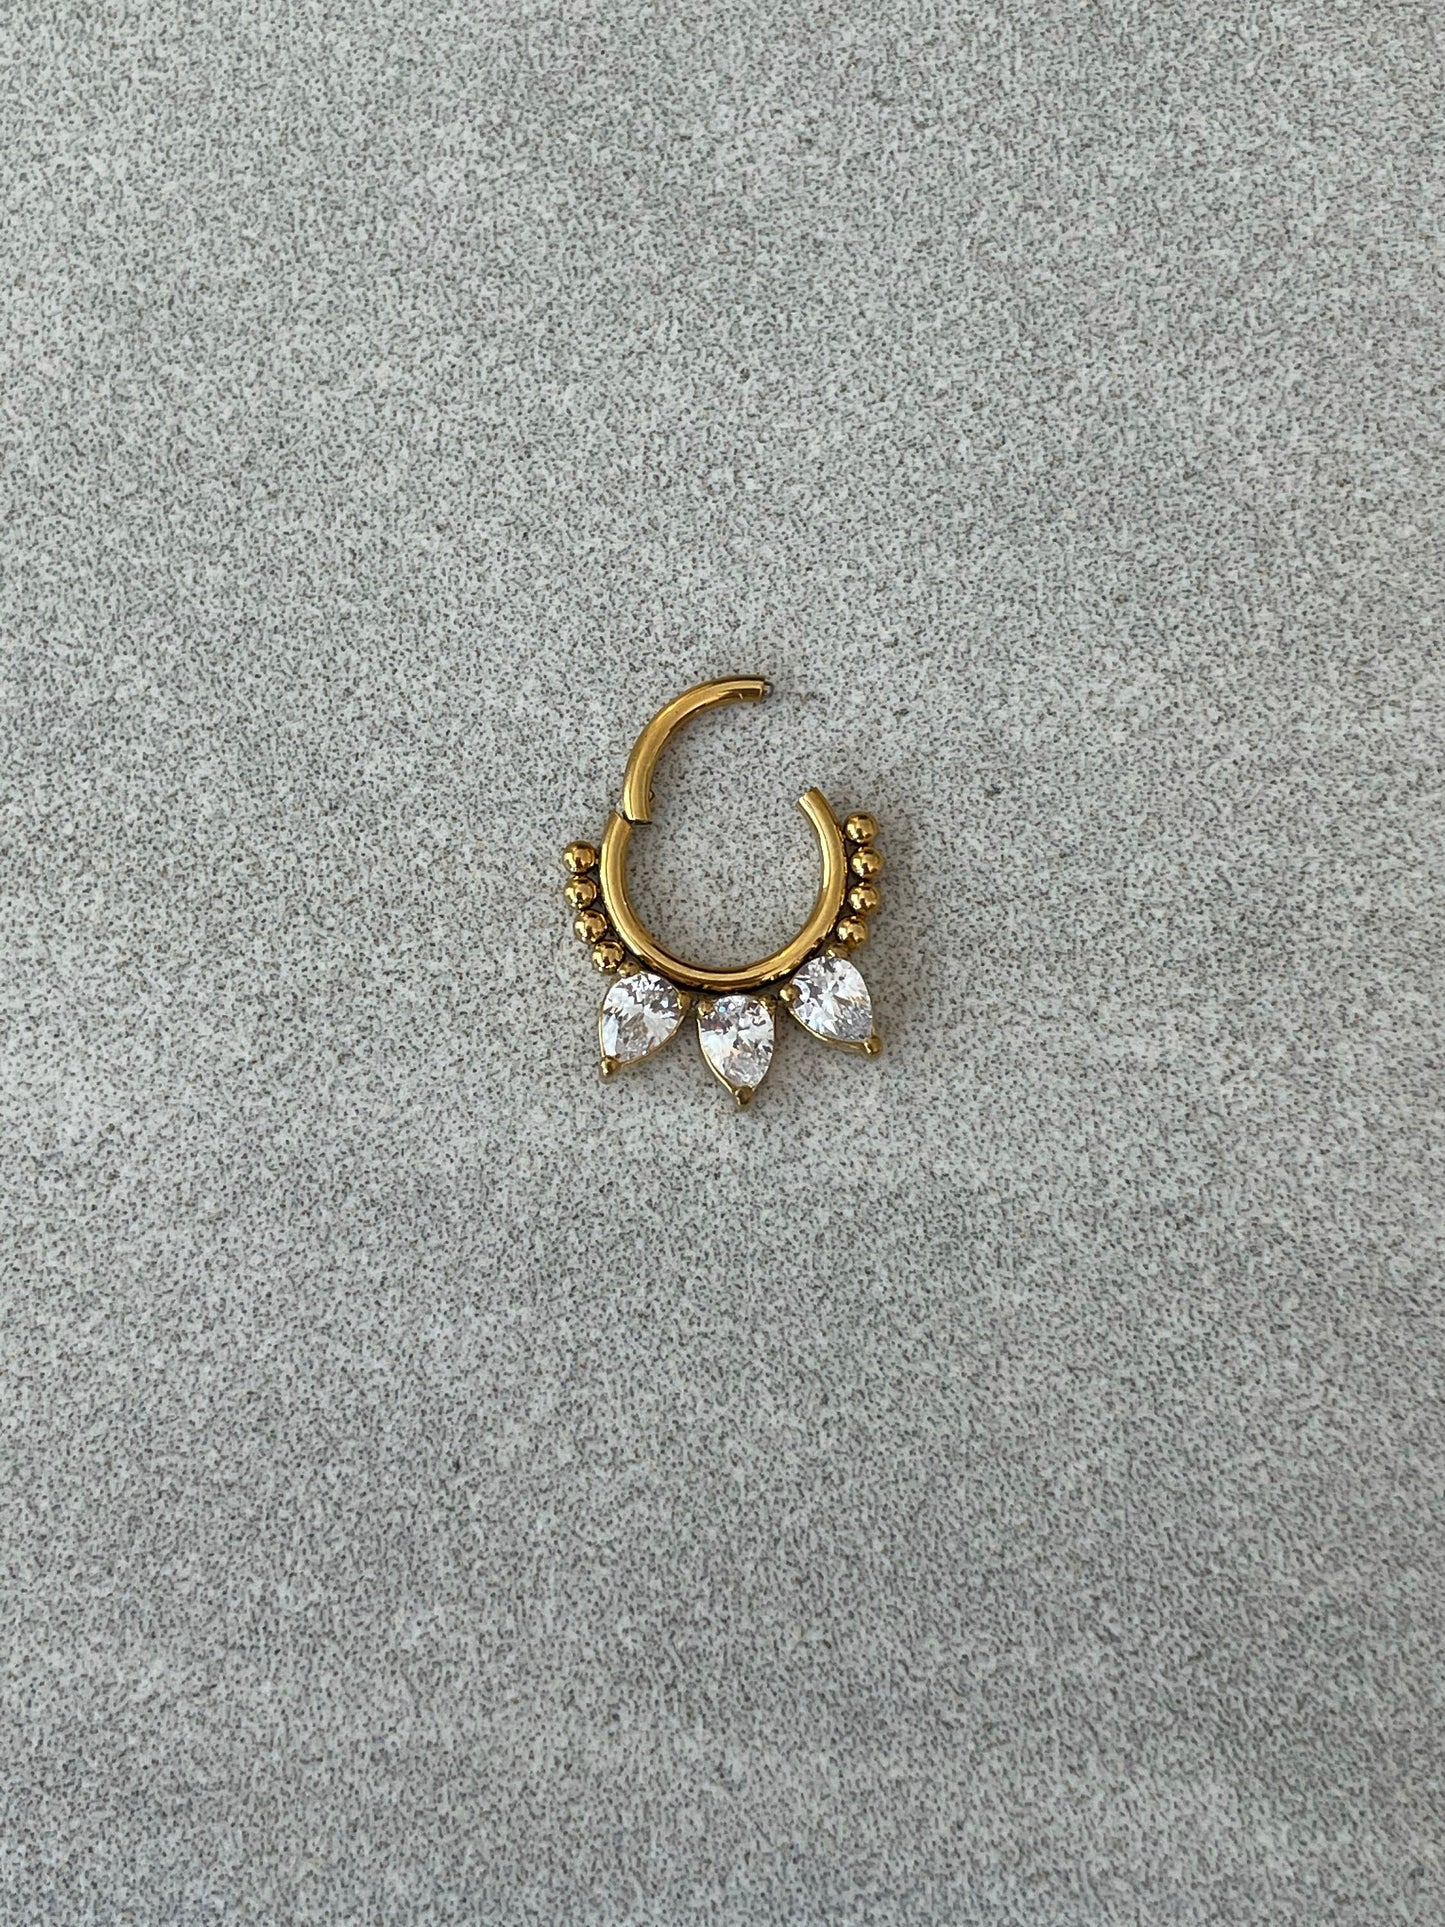 Gothic Gold Septum Piercing (16G | 8mm | Surgical Steel | Gold, Rose Gold, Black, or Silver)